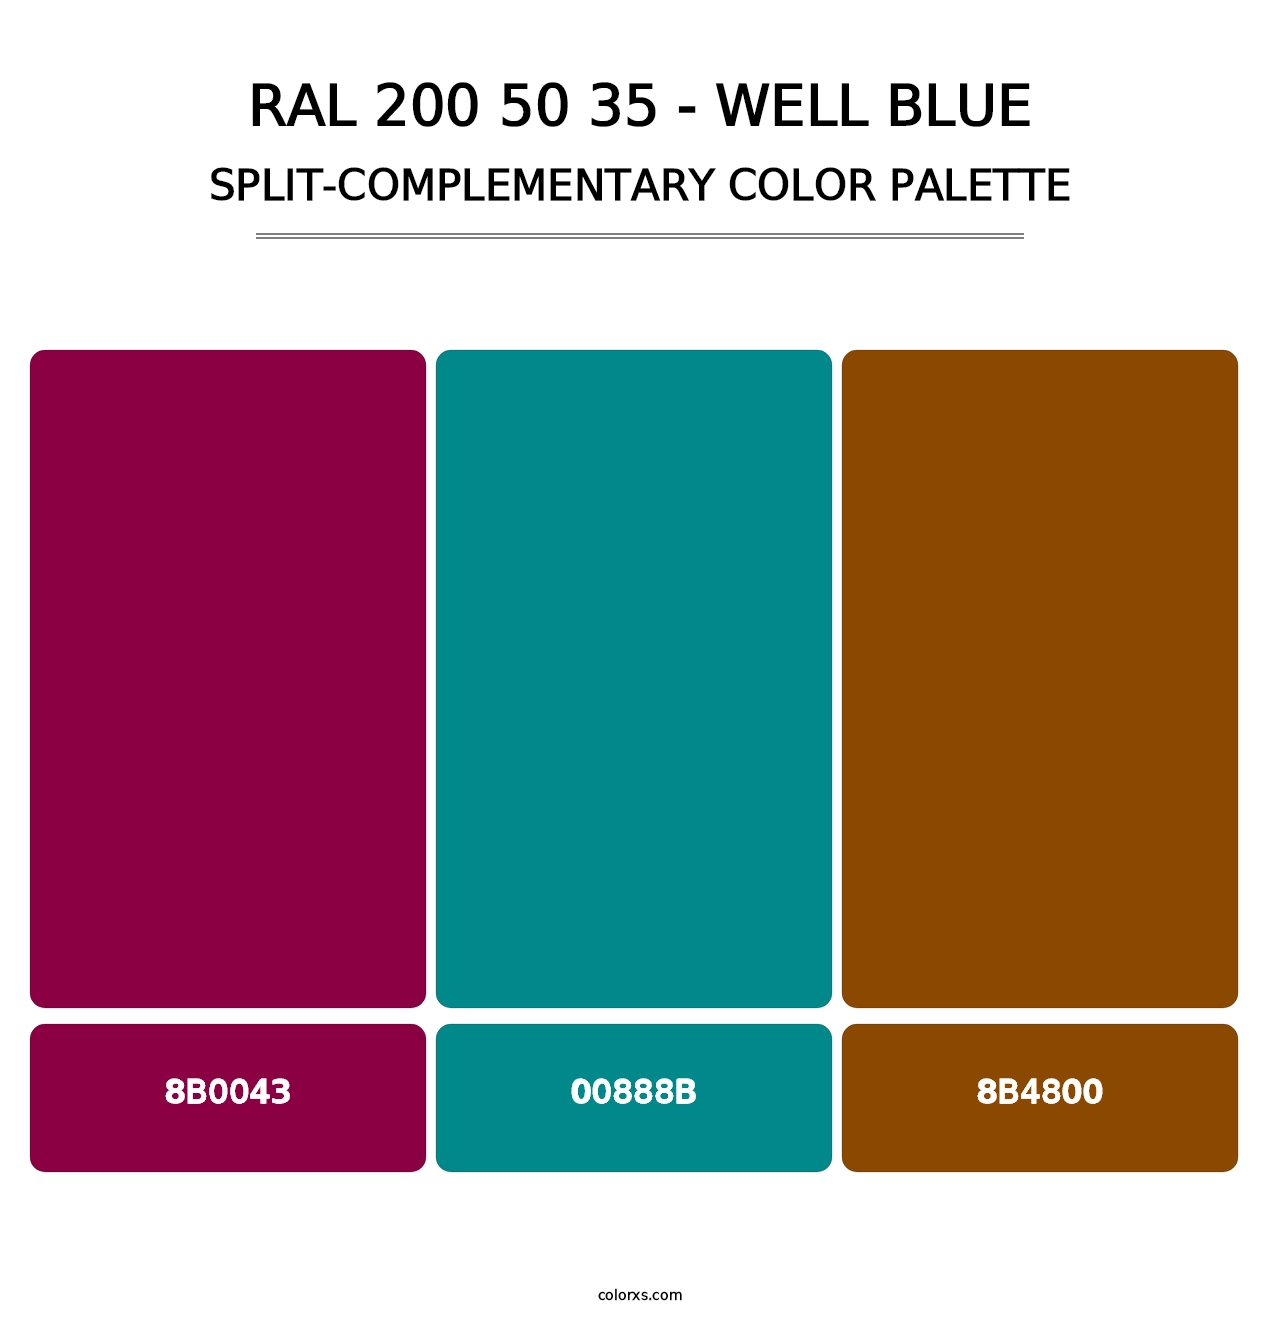 RAL 200 50 35 - Well Blue - Split-Complementary Color Palette